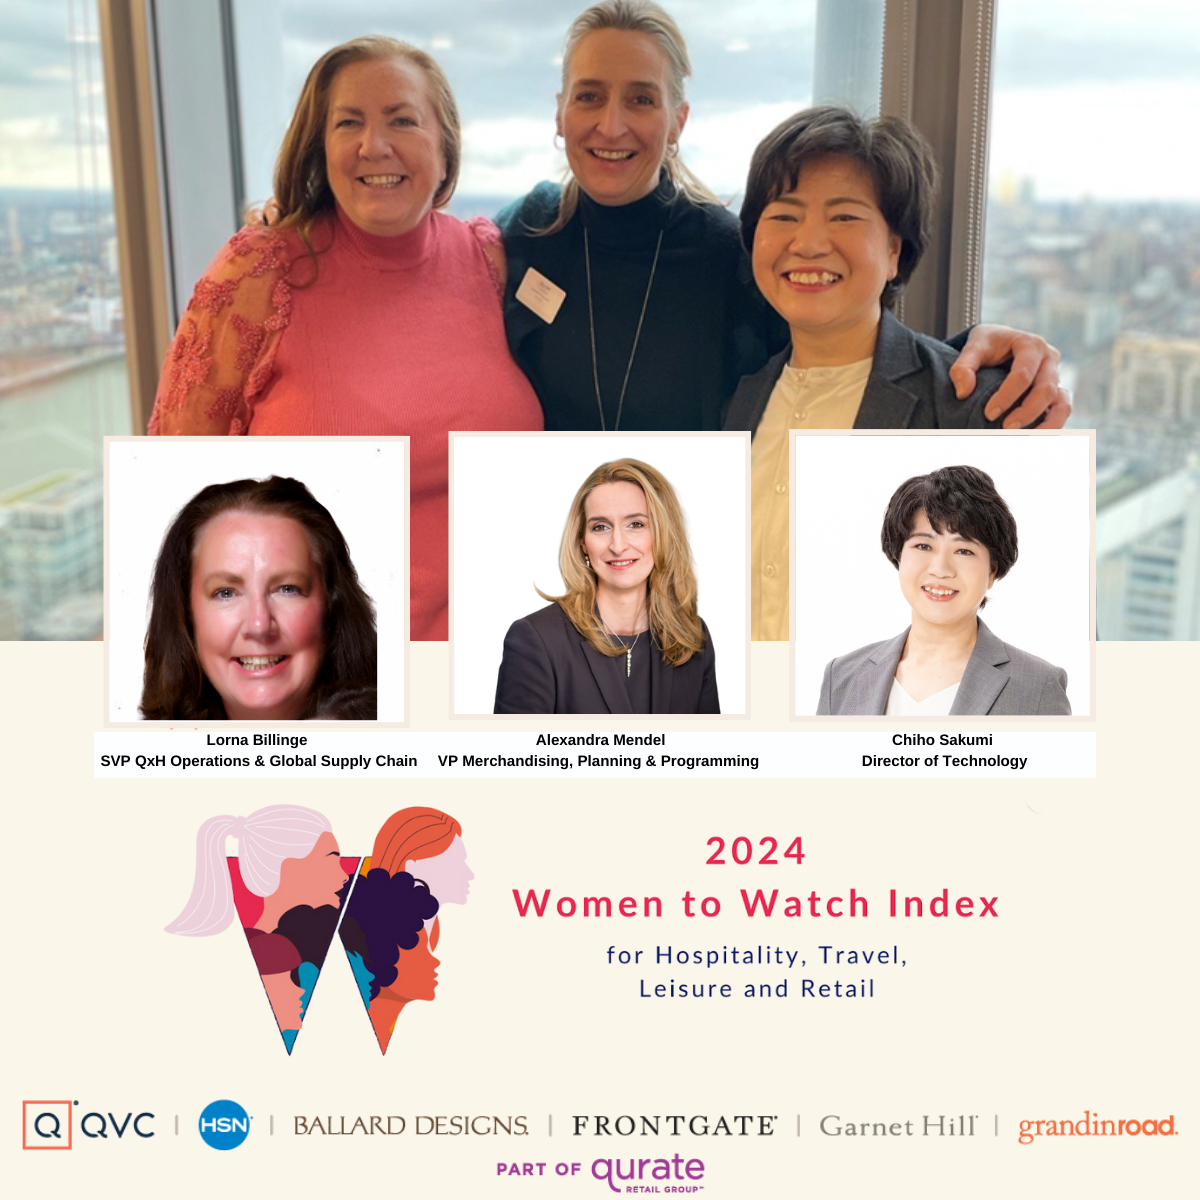 Lorna Billinge, SVP Operations & Global Supply Chain, Alexandra Mendel, VP Merchandising, Planning & Programming (QVC UK) and Chiho Sakumi, Director, Technology (QVC Japan) are pictured together with the Women to Watch Index and Qurate Retail Group logos. 